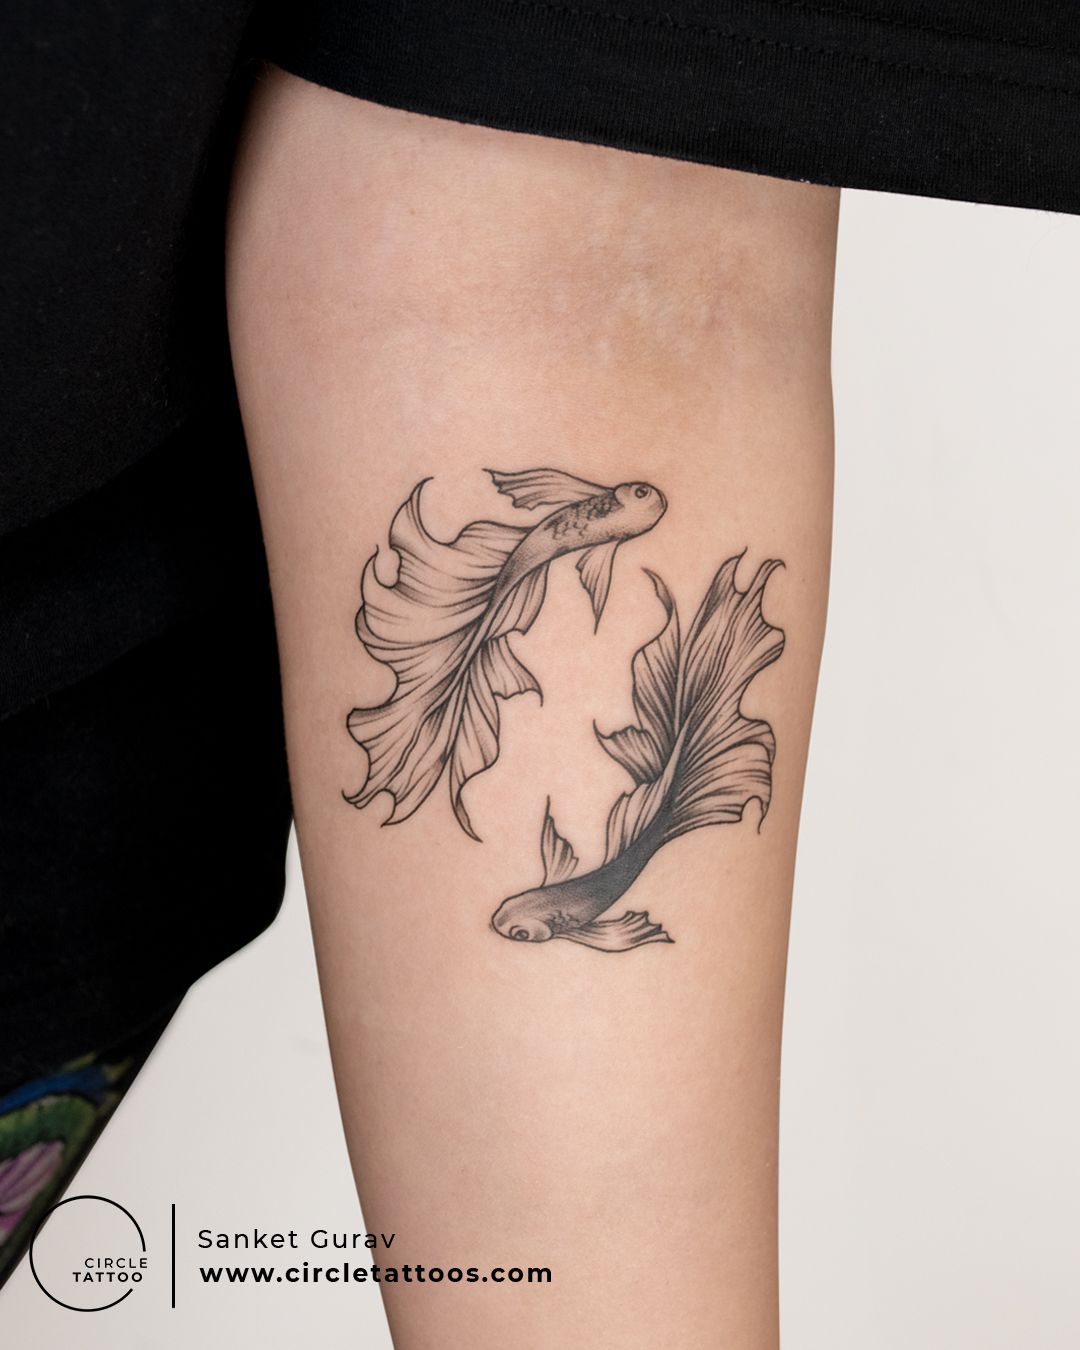 Mirage Tattoos - Be like a free bird, free soul tattoo on back, making in  dwarka. Tattoo ideas for first timer who planning to get inked. Stay tuned  follow us for more